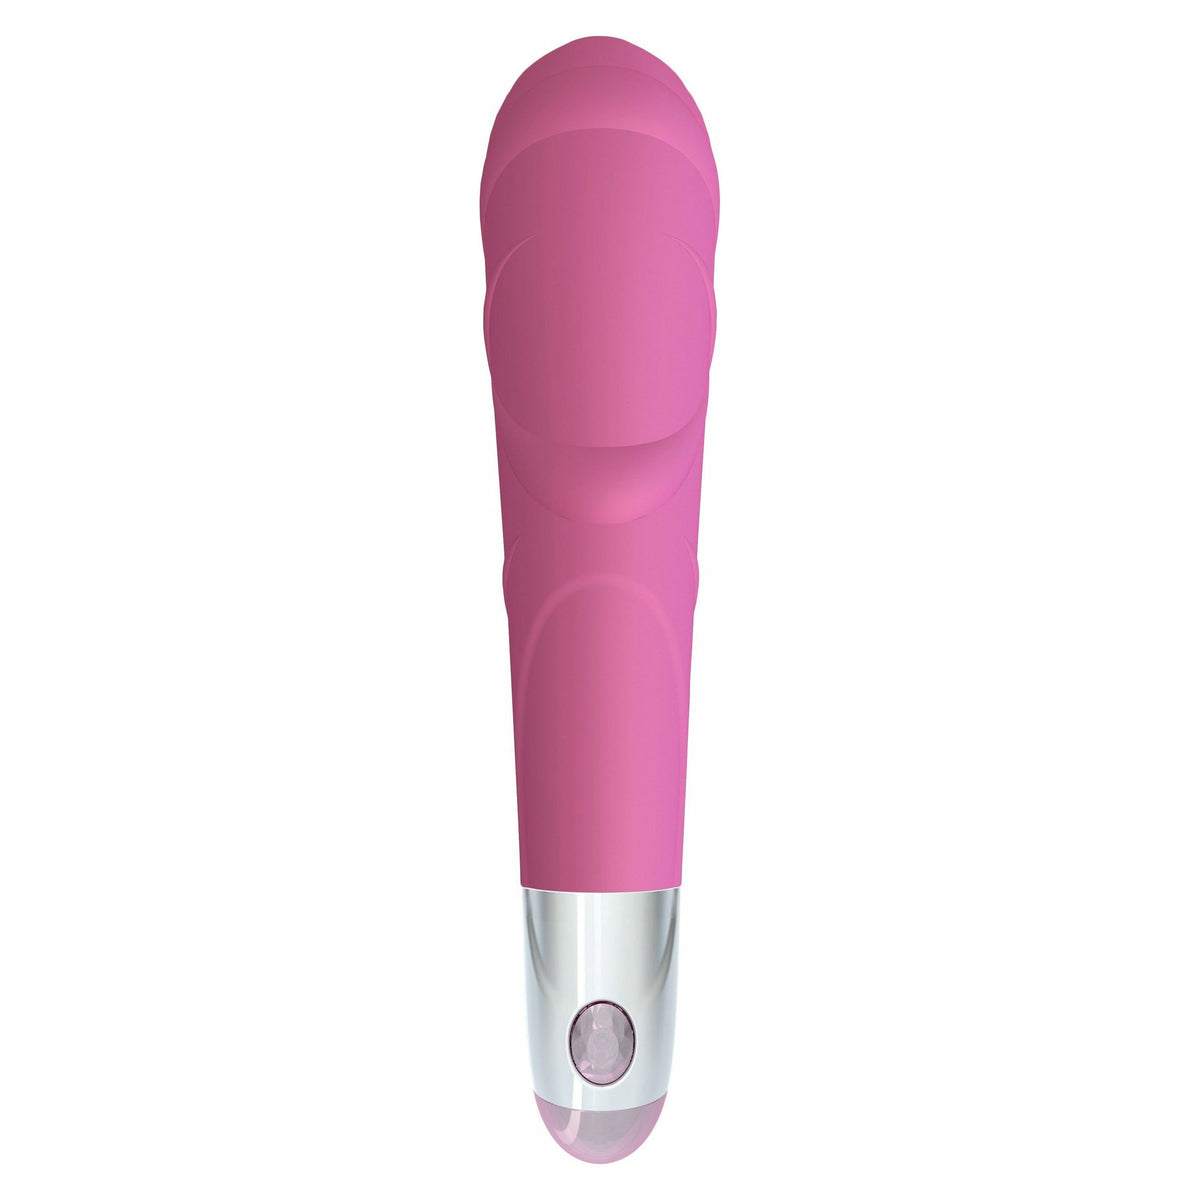 Mae B Lovely Vibes - Laced Textured Soft Touch Vibrator - Pink